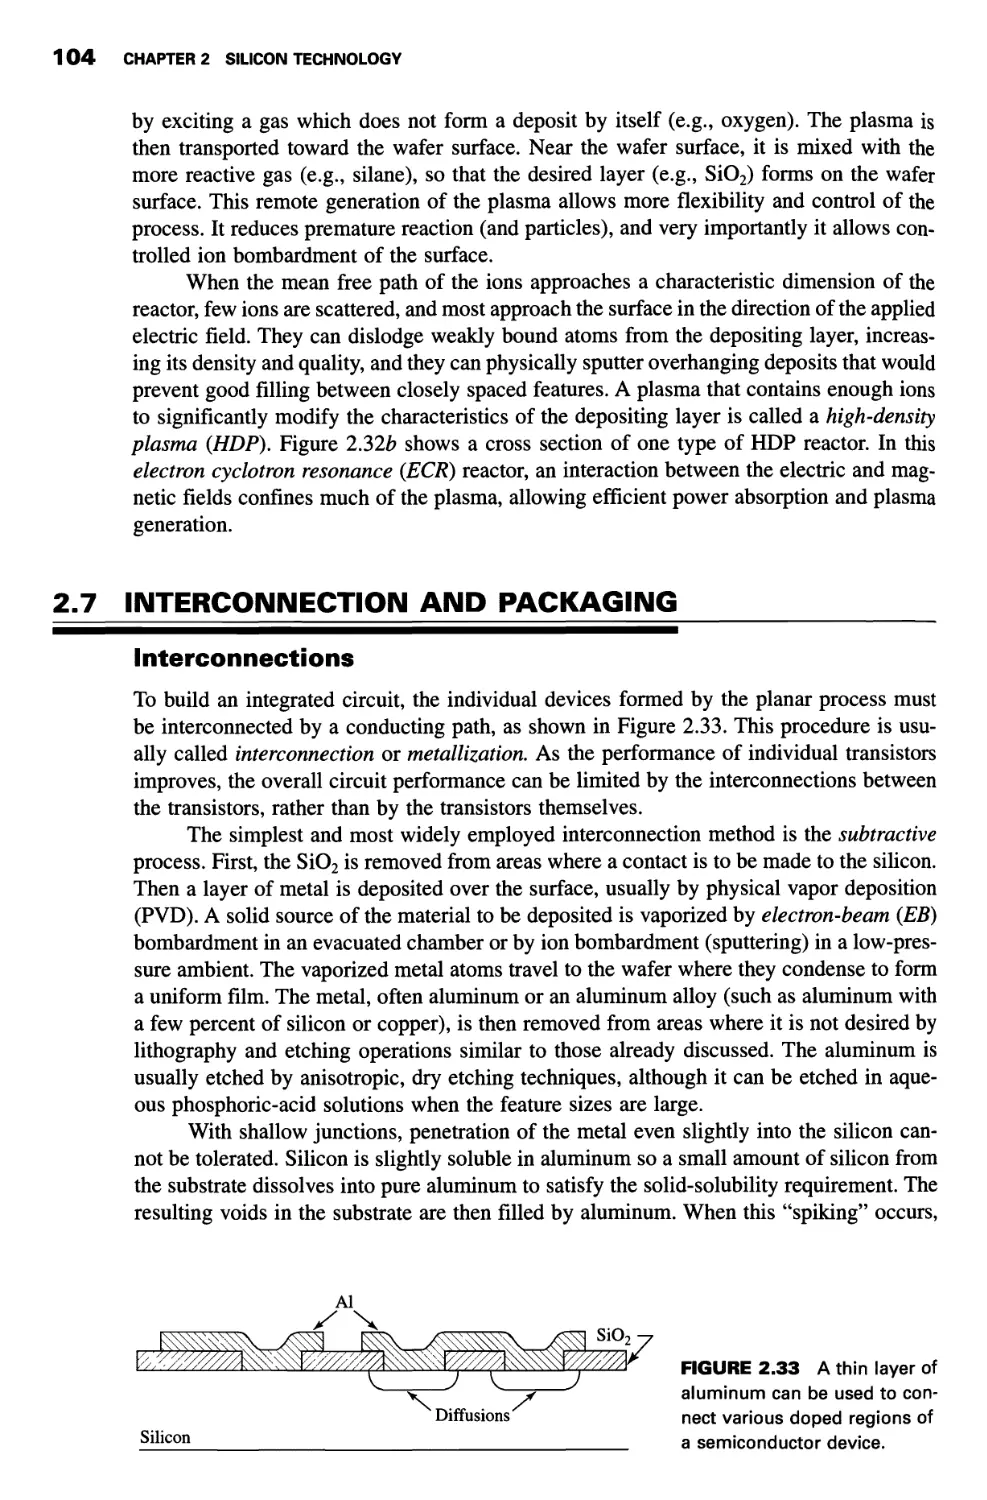 2.7 Interconnection and Packaging